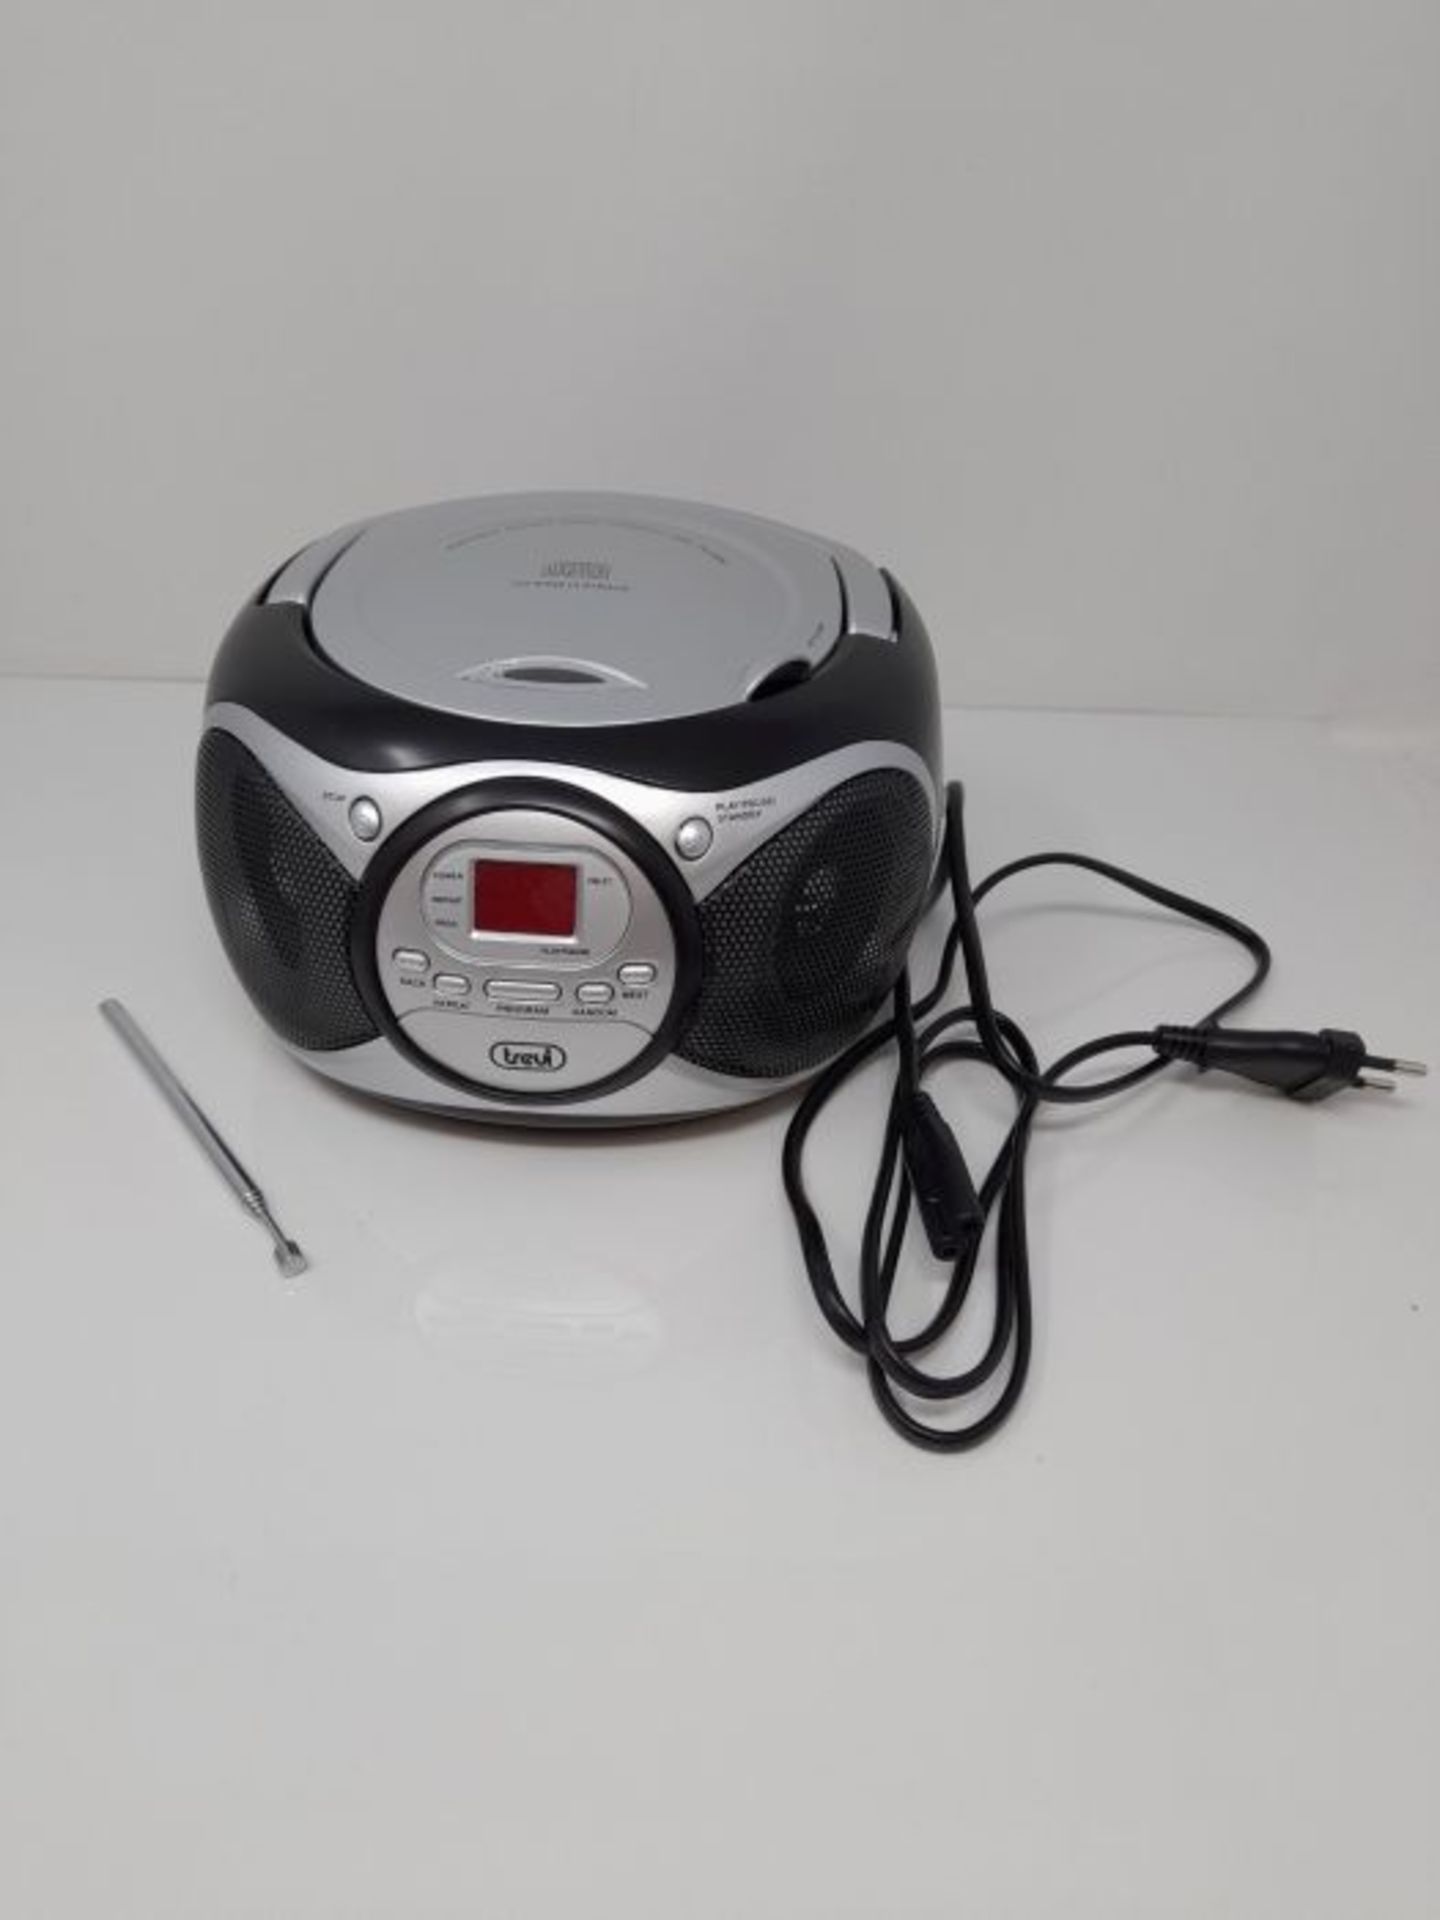 RRP £51.00 Trevi CD 512 Portable CD Player with Radio and Aux-in - Image 2 of 3